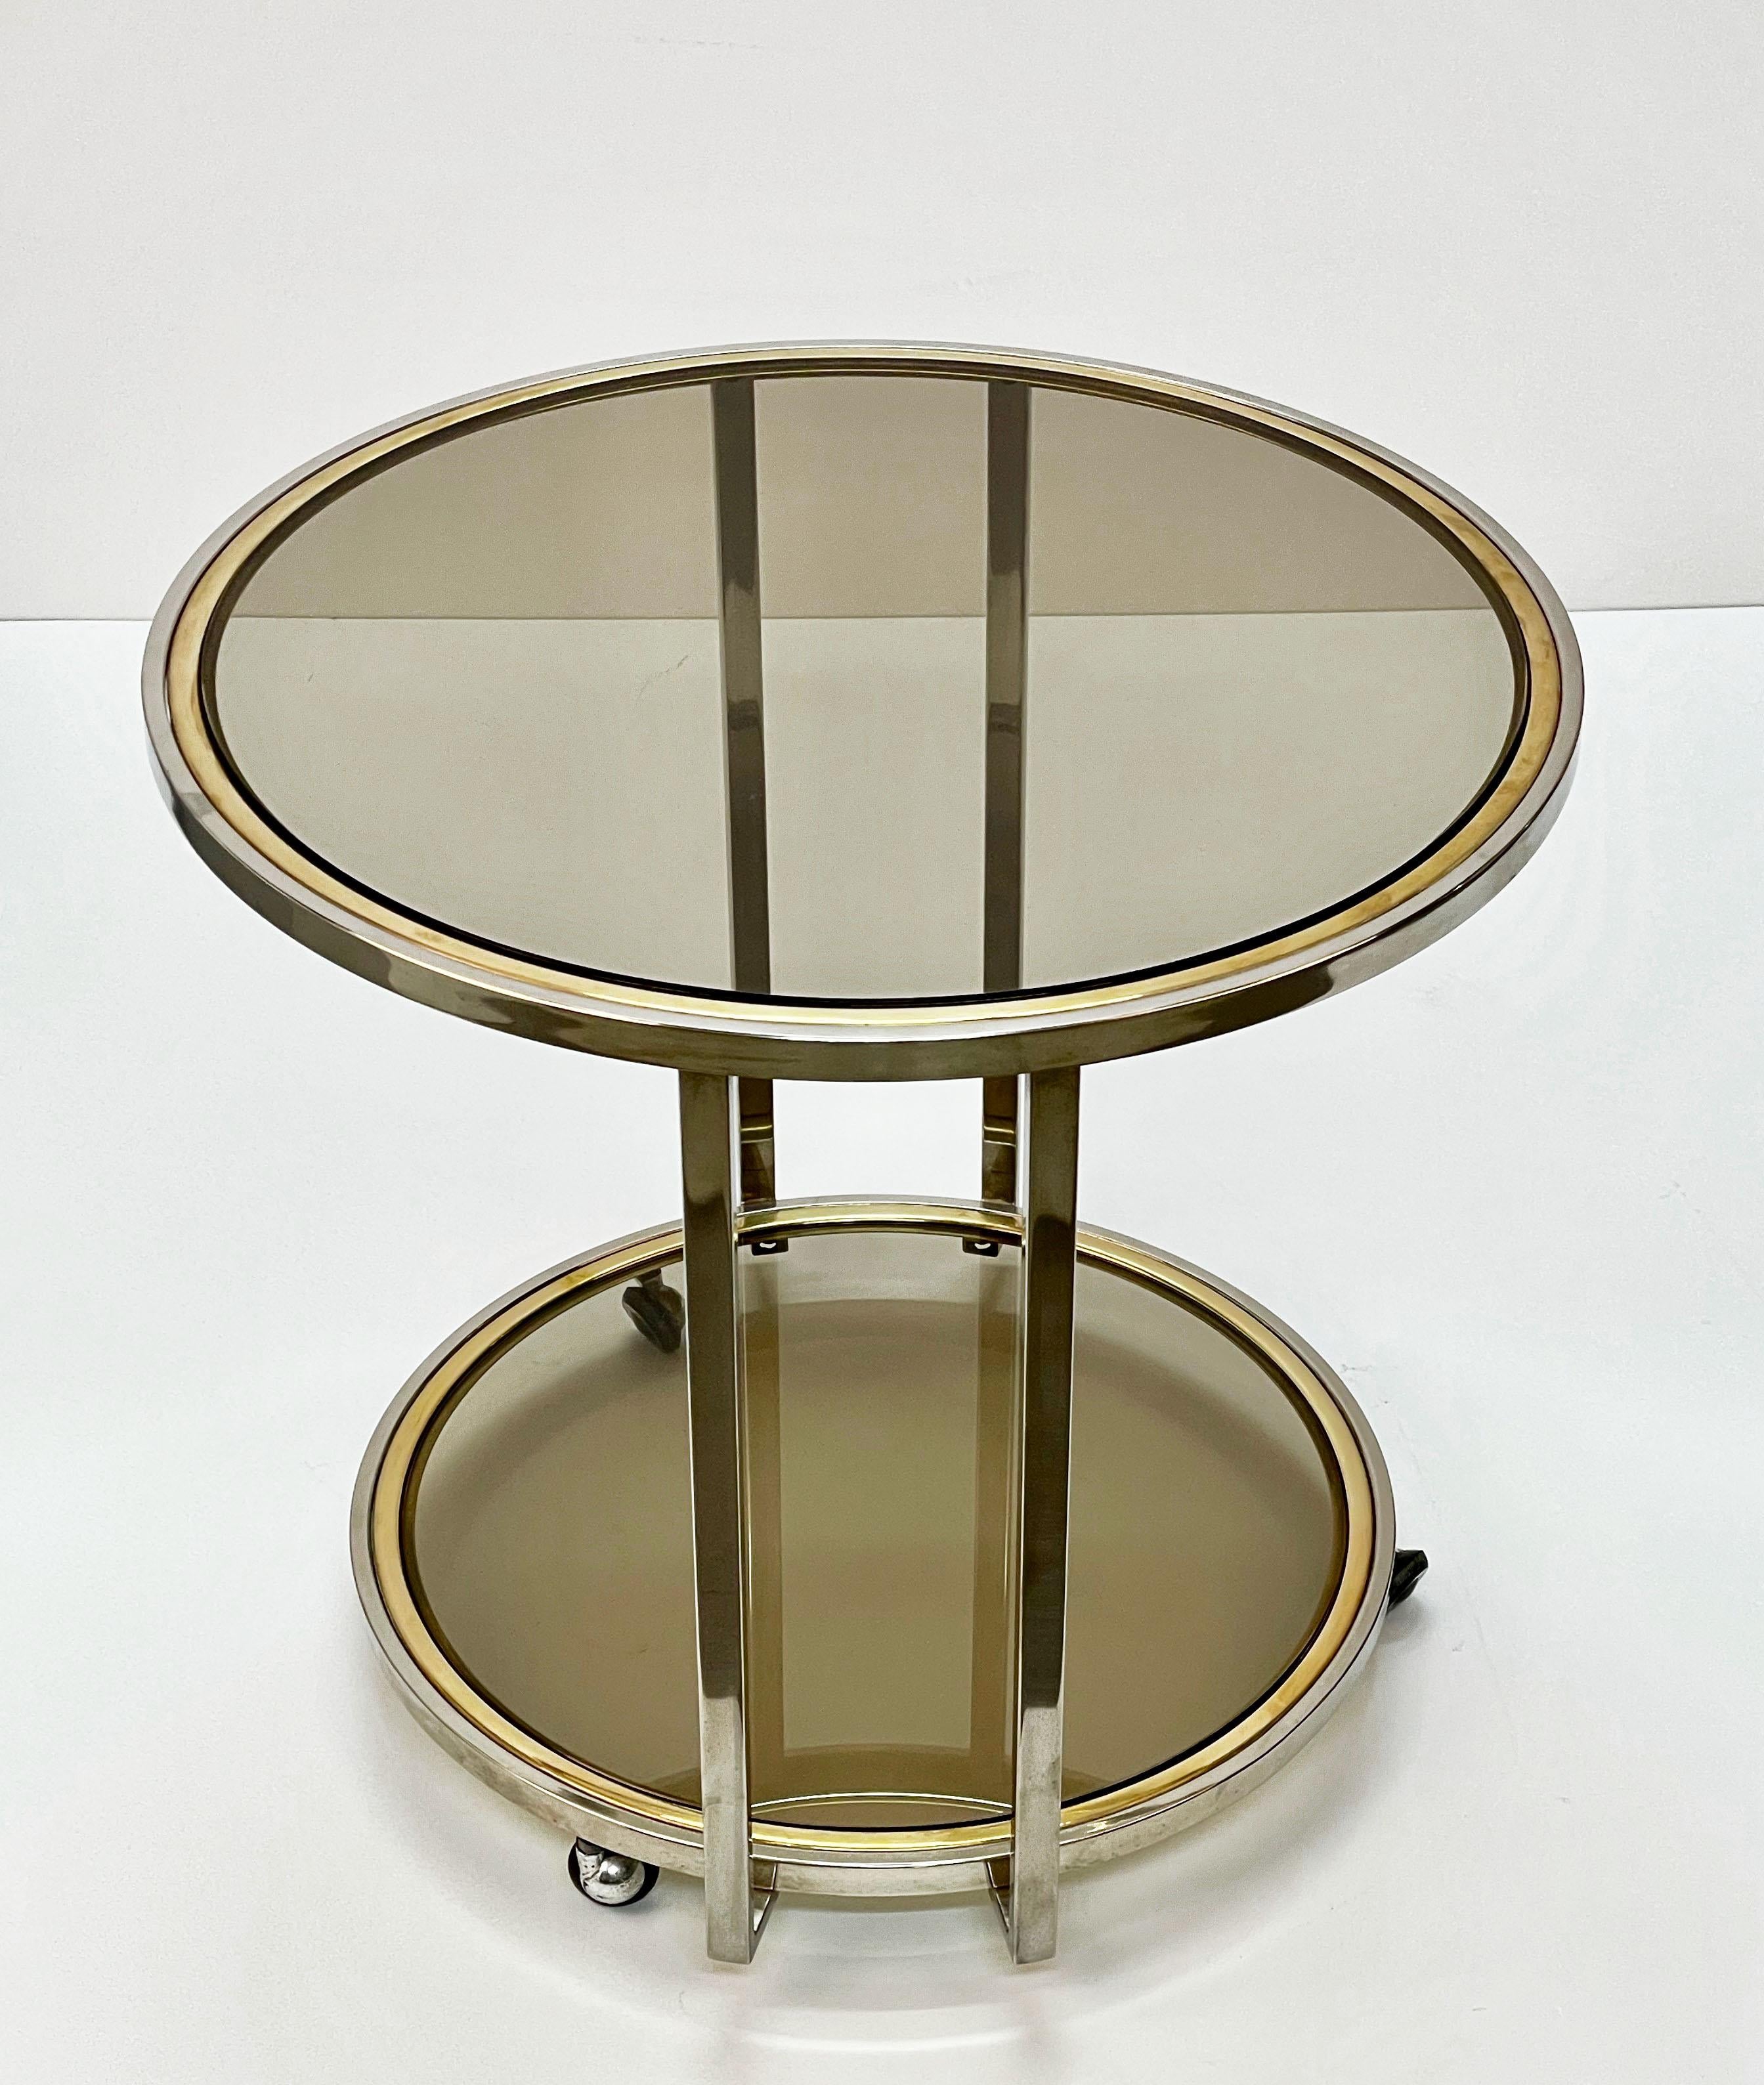 Midcentury Brass and Chrome and Glass Italian Coffee Table after Romeo Rega 1970 For Sale 9